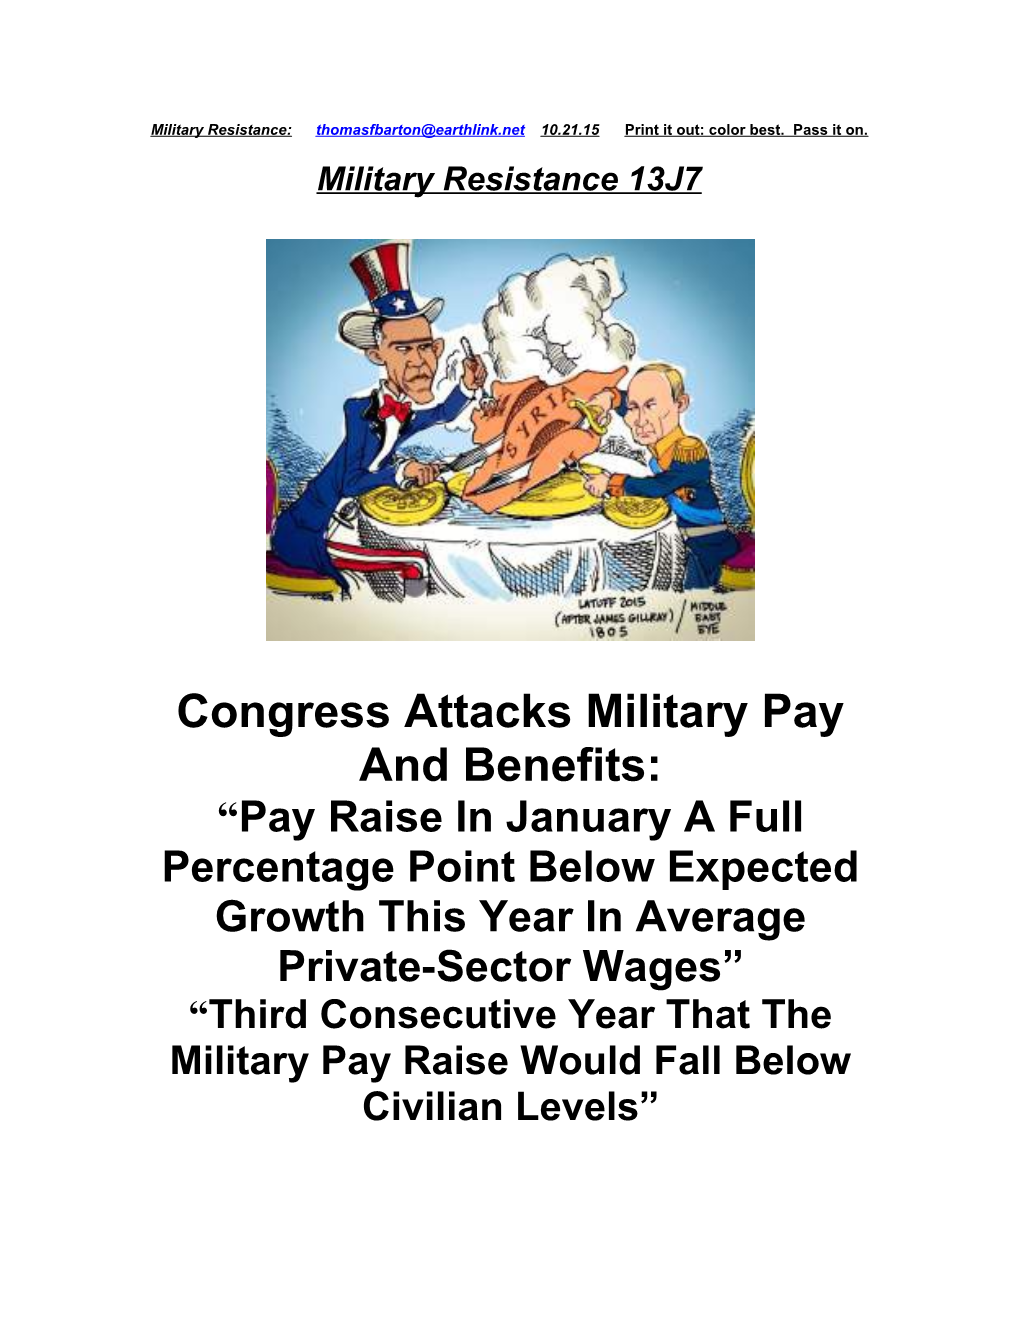 Congress Attacks Military Pay and Benefits